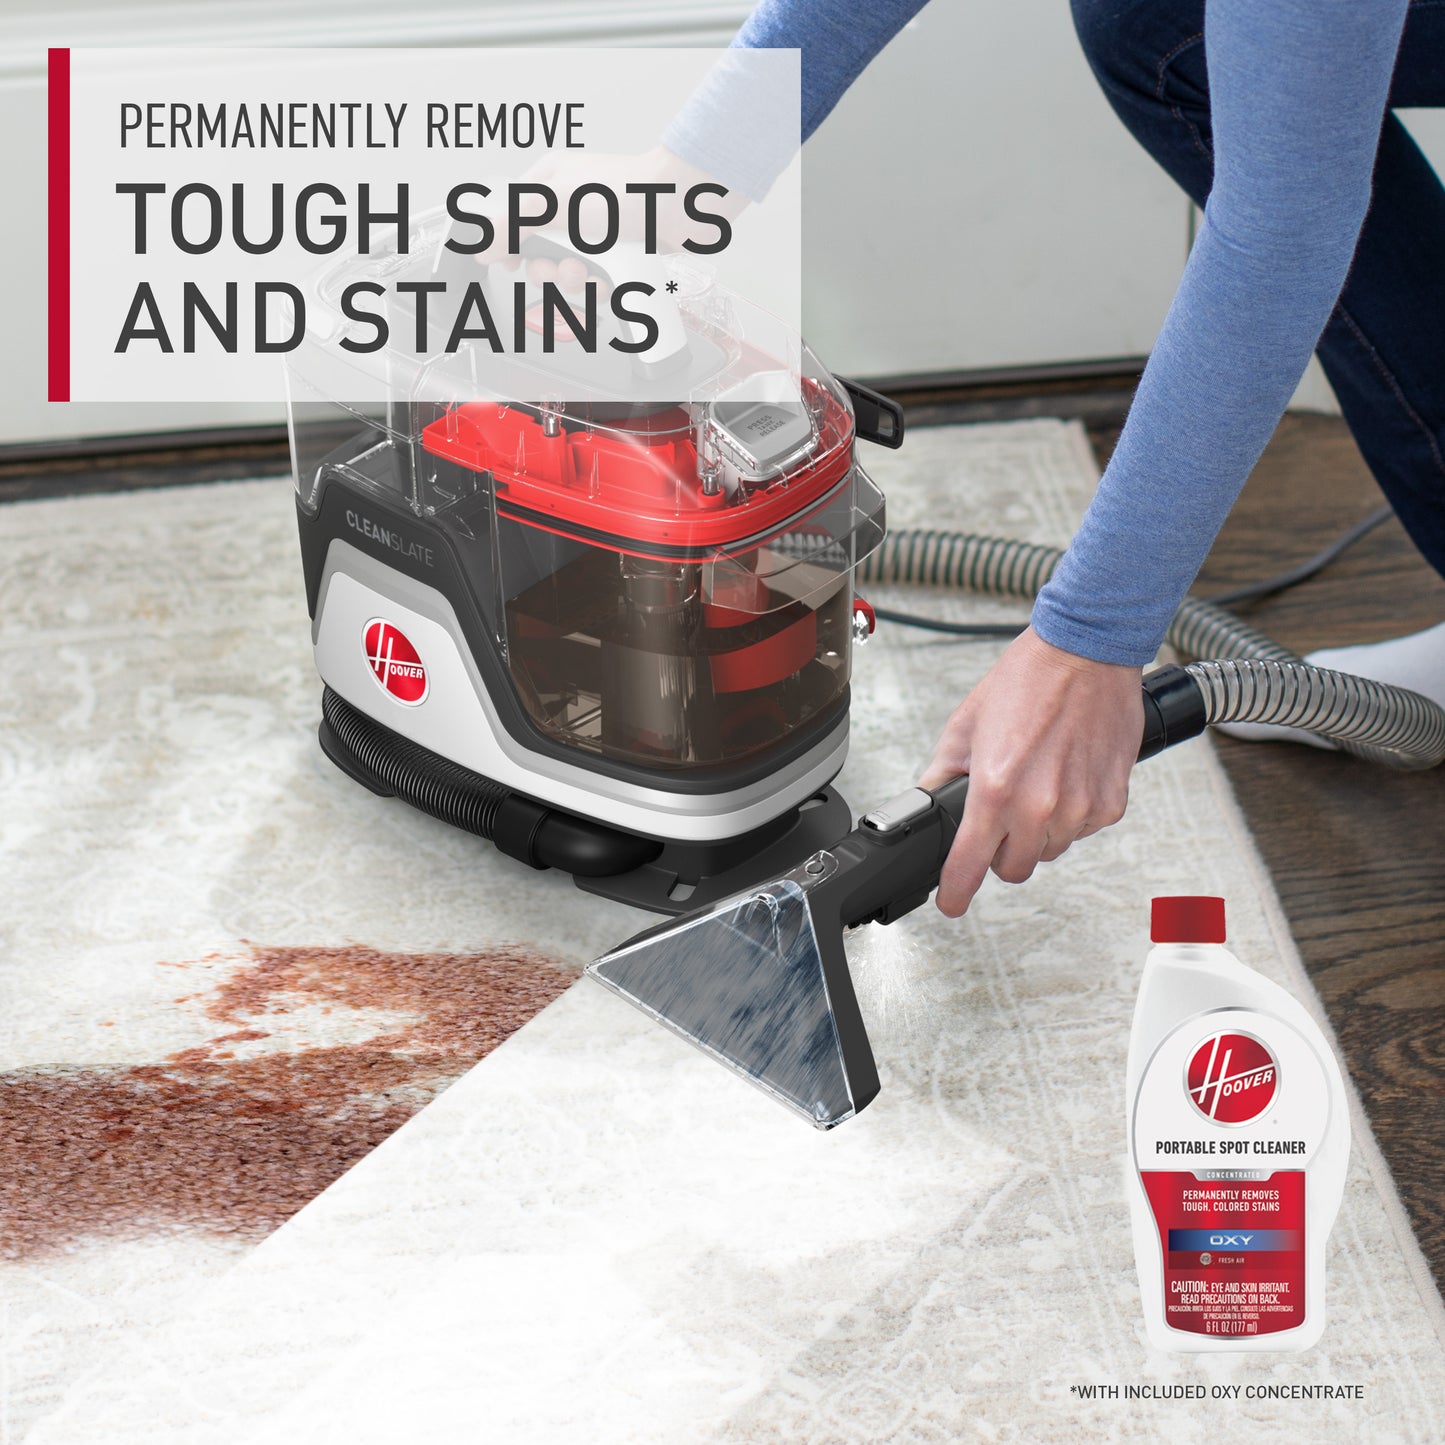 Demonstration of a Hoover Cleanslate portable spot cleaner in action, easily and permanently removing tough spots and stains from a white carpet 